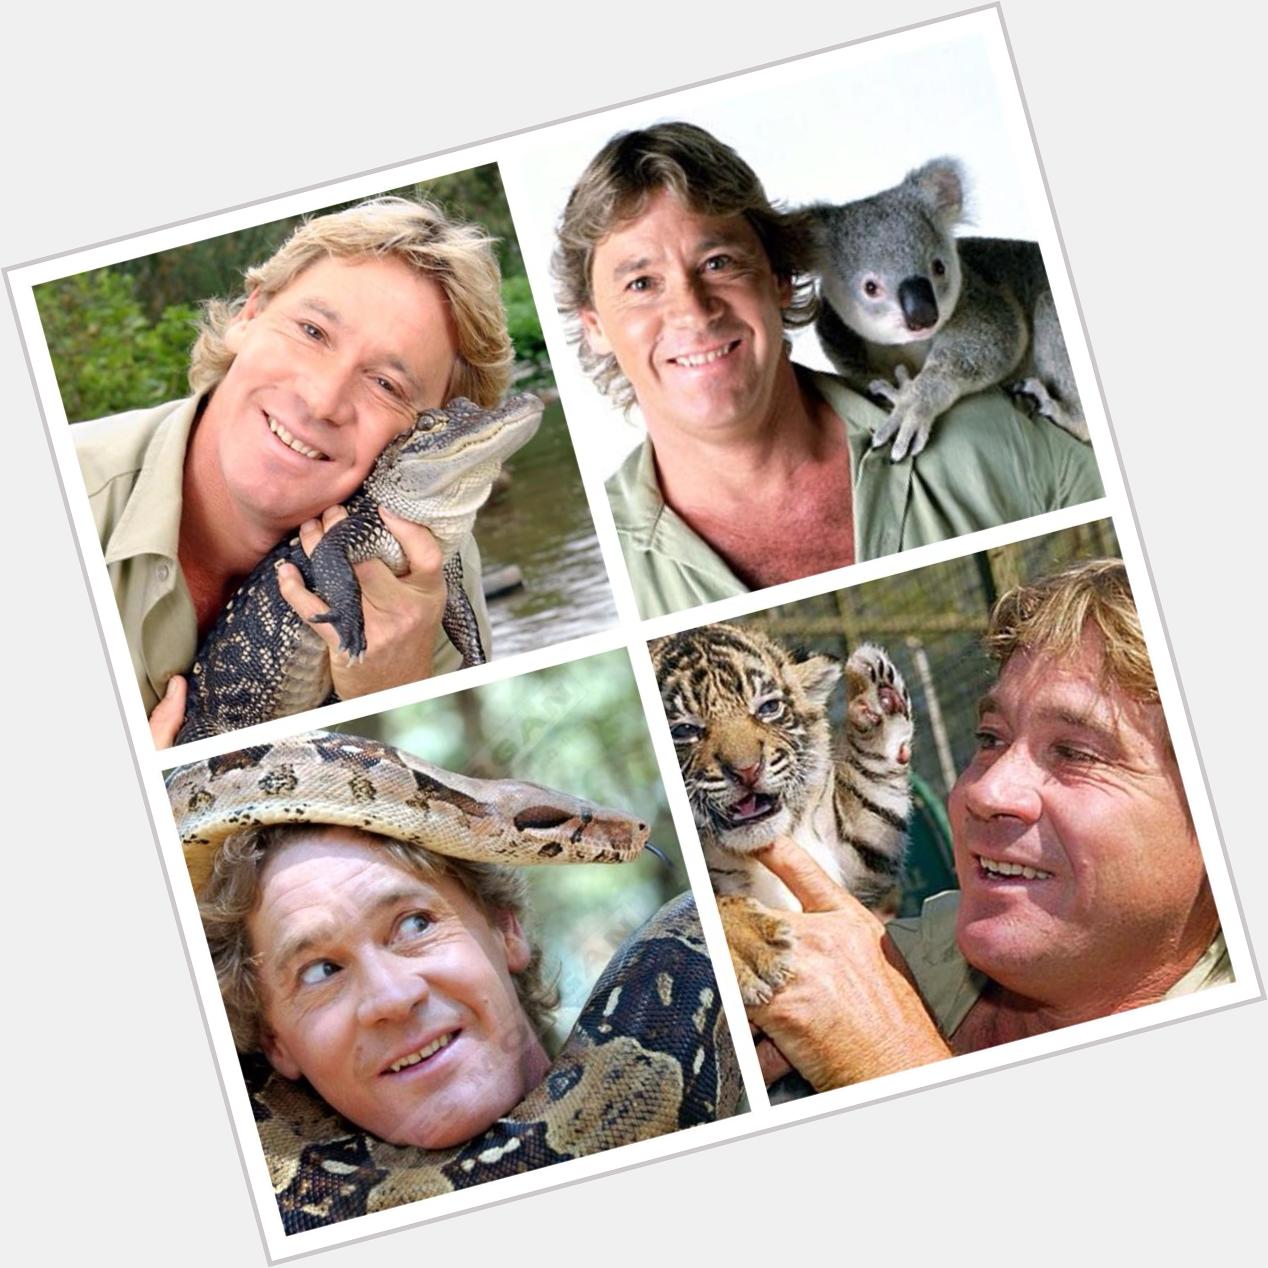 Happy Birthday to the great Steve Irwin. You were such a big part of my childhood. You\ll always be missed 